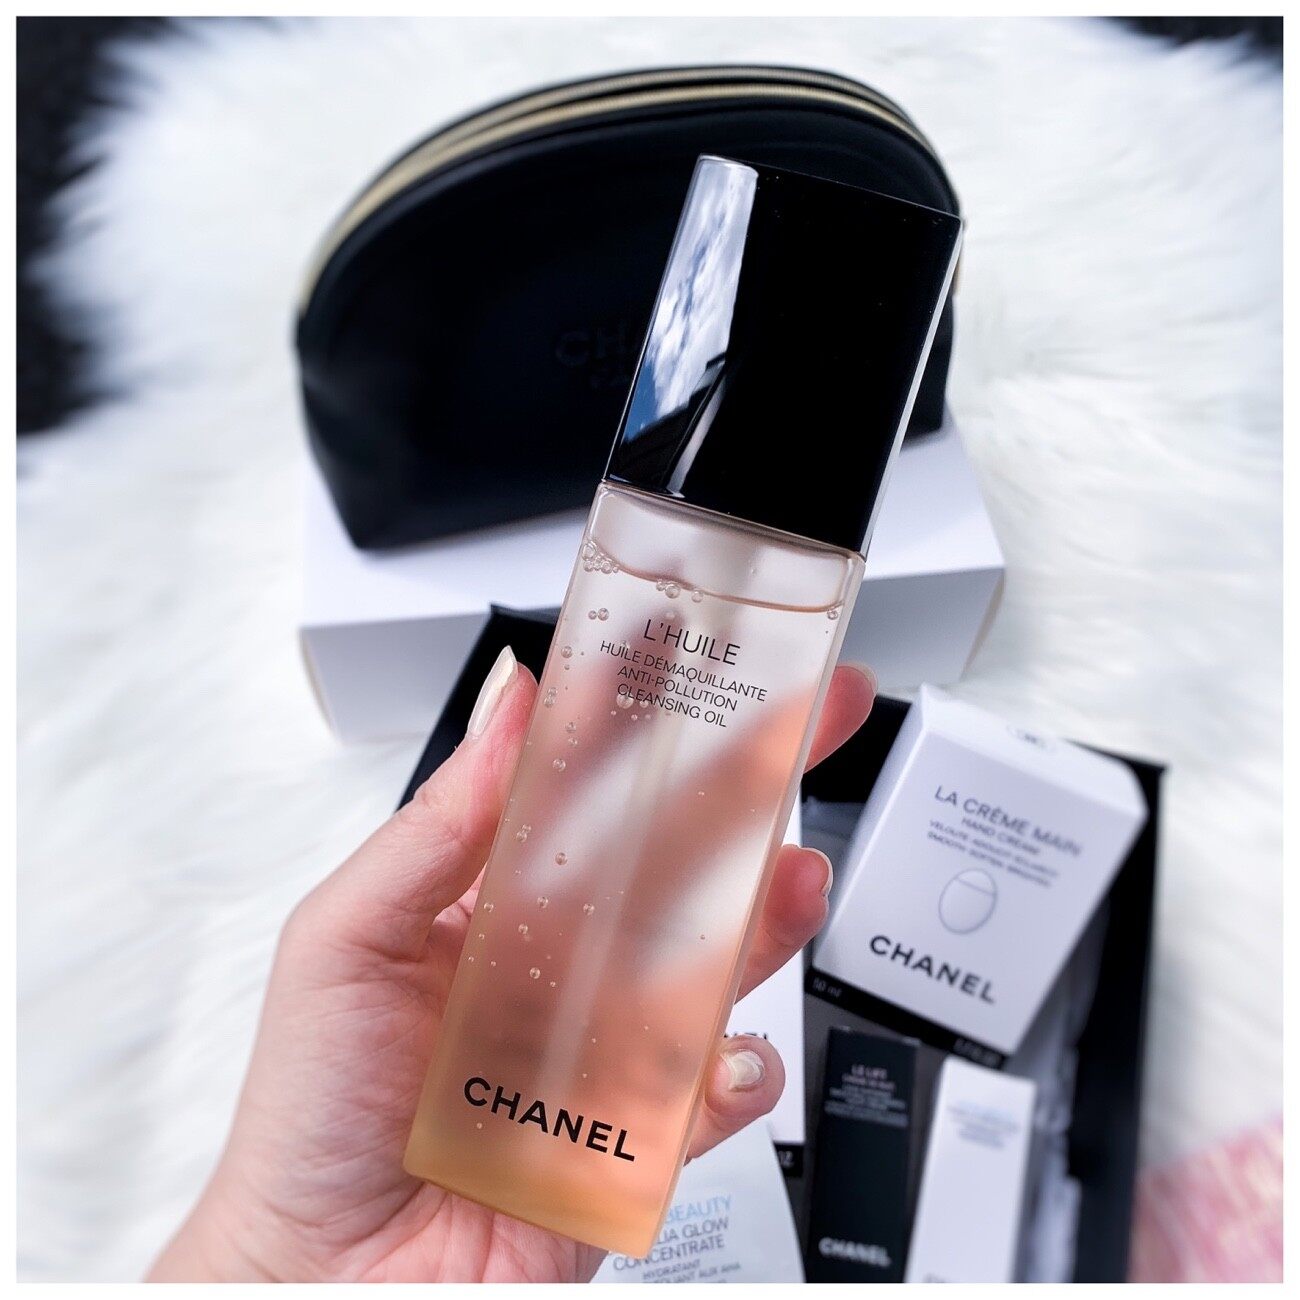 Chanel L'huile Anti-Pollution Cleansing Oil 150ml.